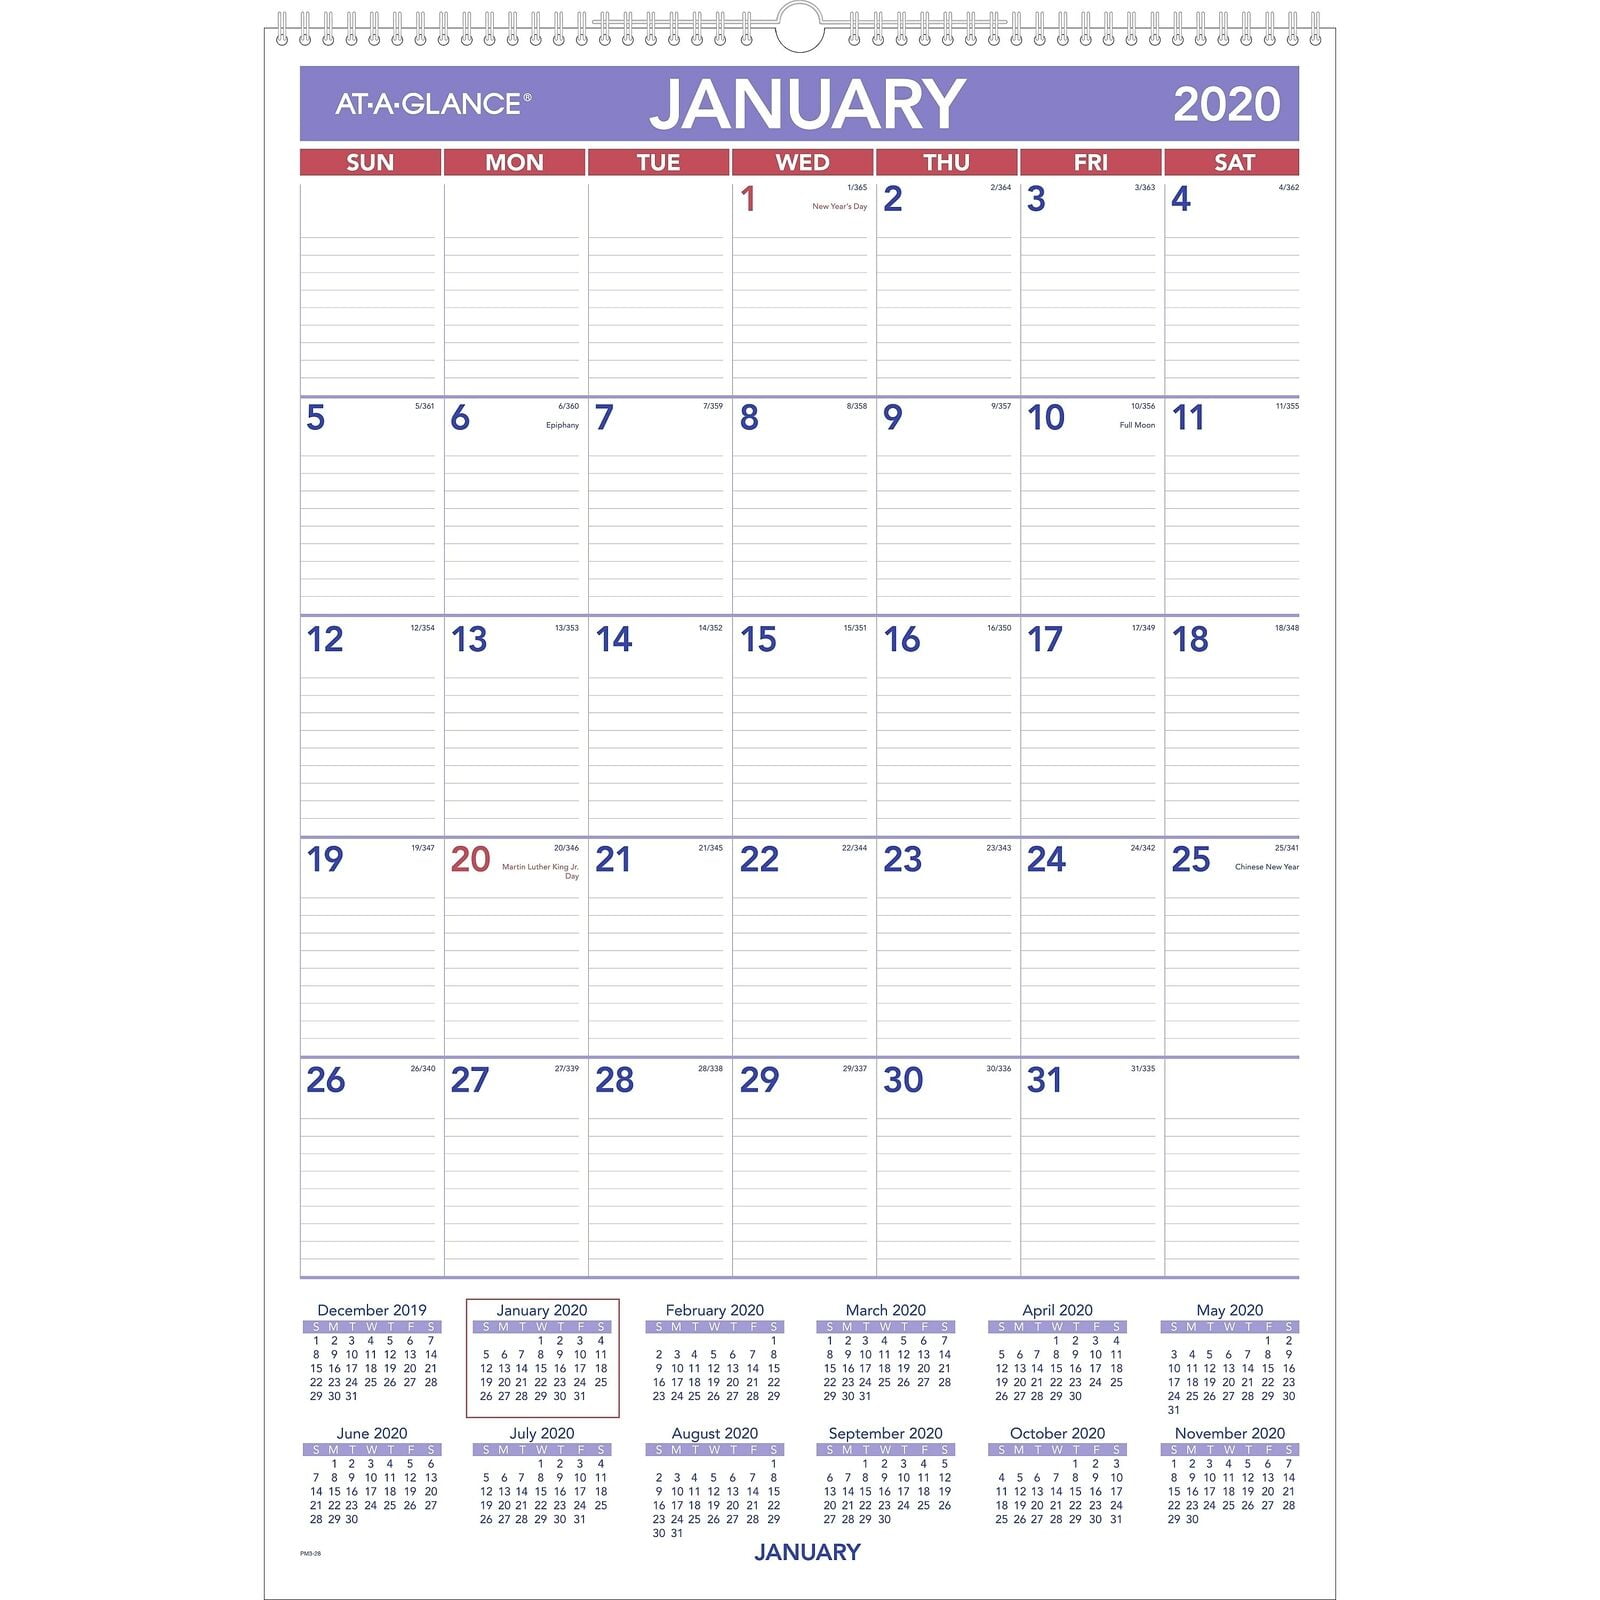 2020-at-a-glance-15-1-2-x-22-3-4-monthly-wall-calendar-pm3-28-20